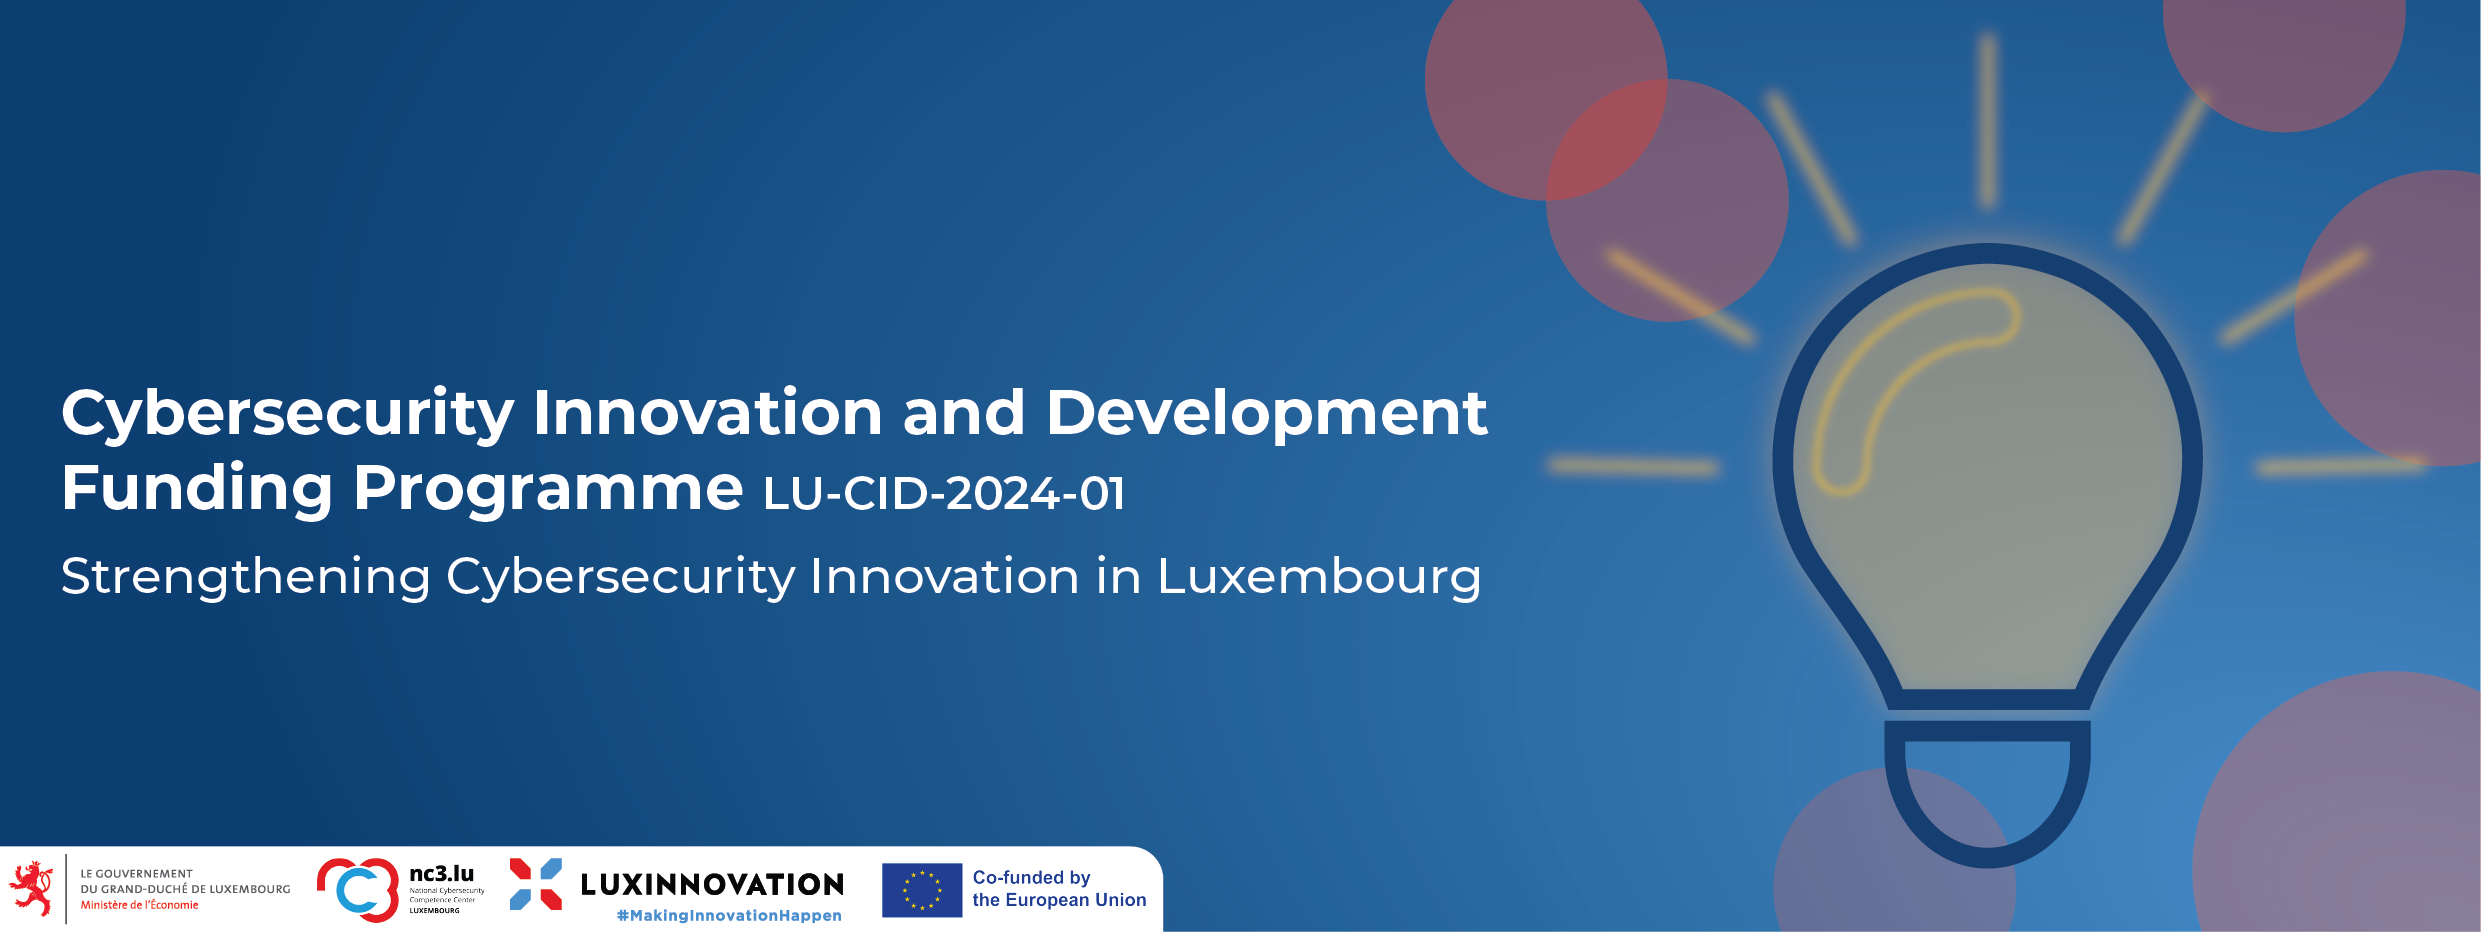 header picture Cybersecurity Innovation and Development Funding Programme (LU-CID-2024-01) Strengthening Cybersecurity Innovation in Luxembourg